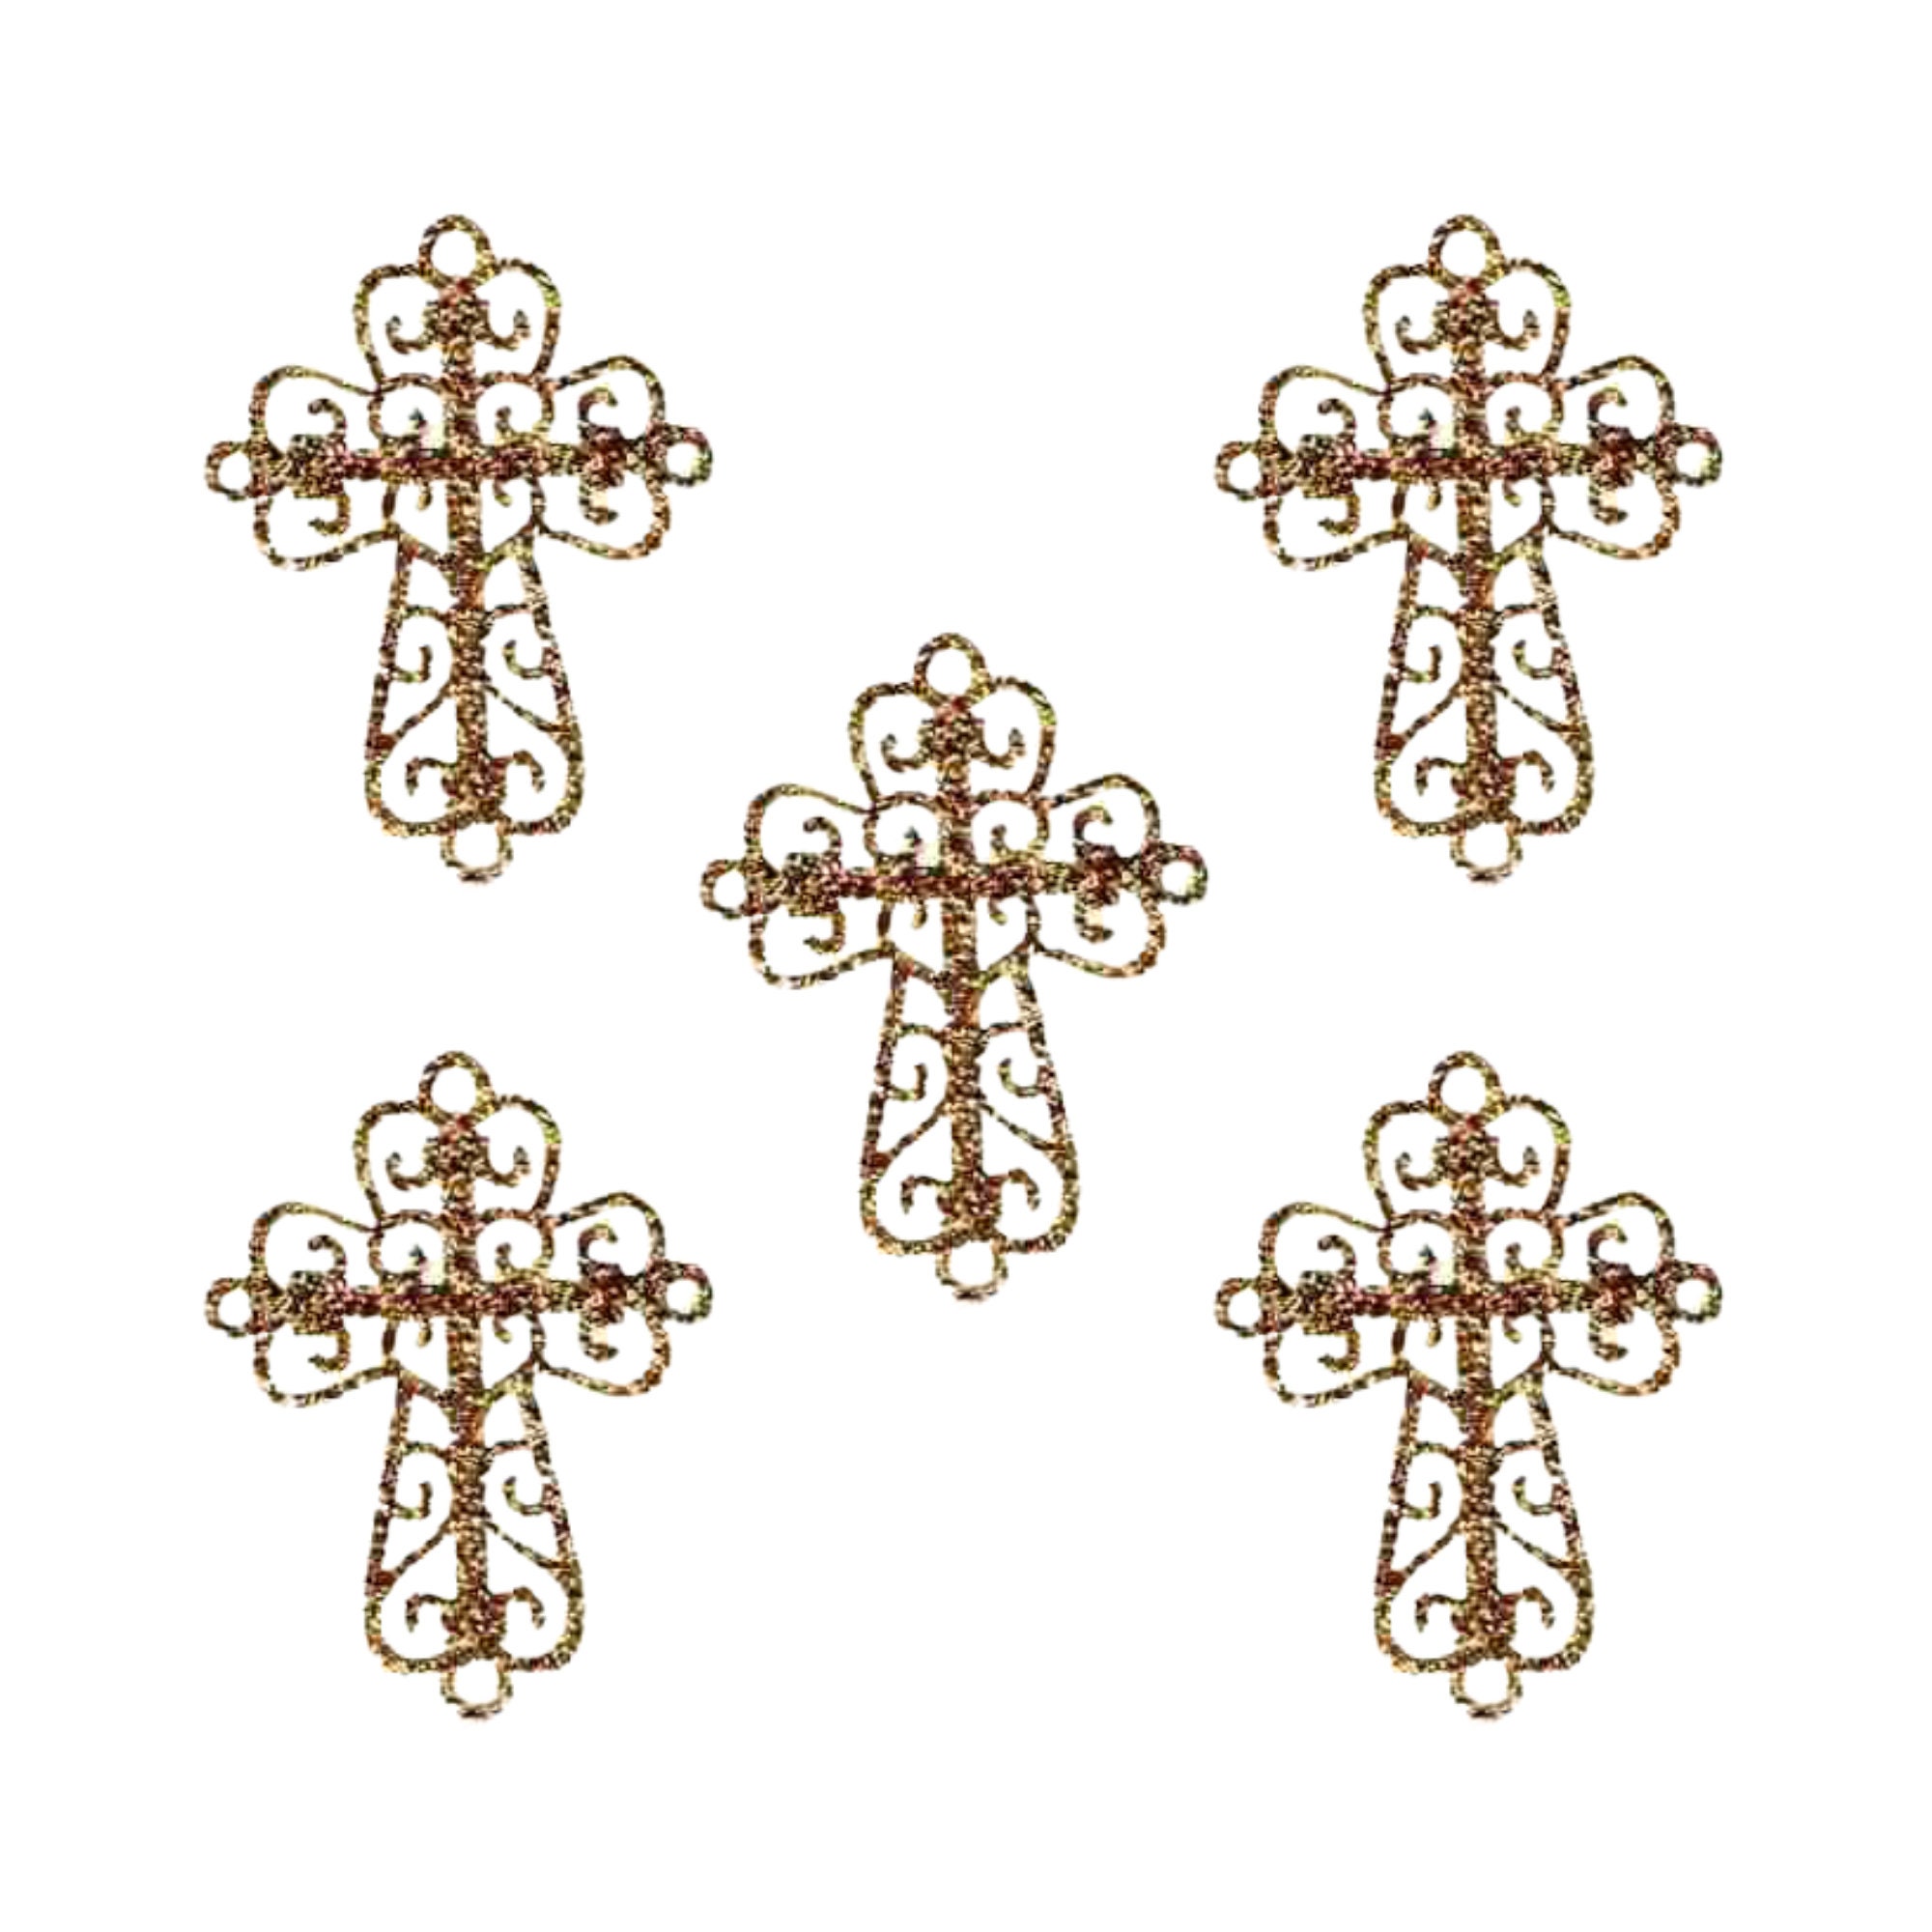 Gold Cross Patches (5-Pack) Religious Embroidered Iron On Patch Applique